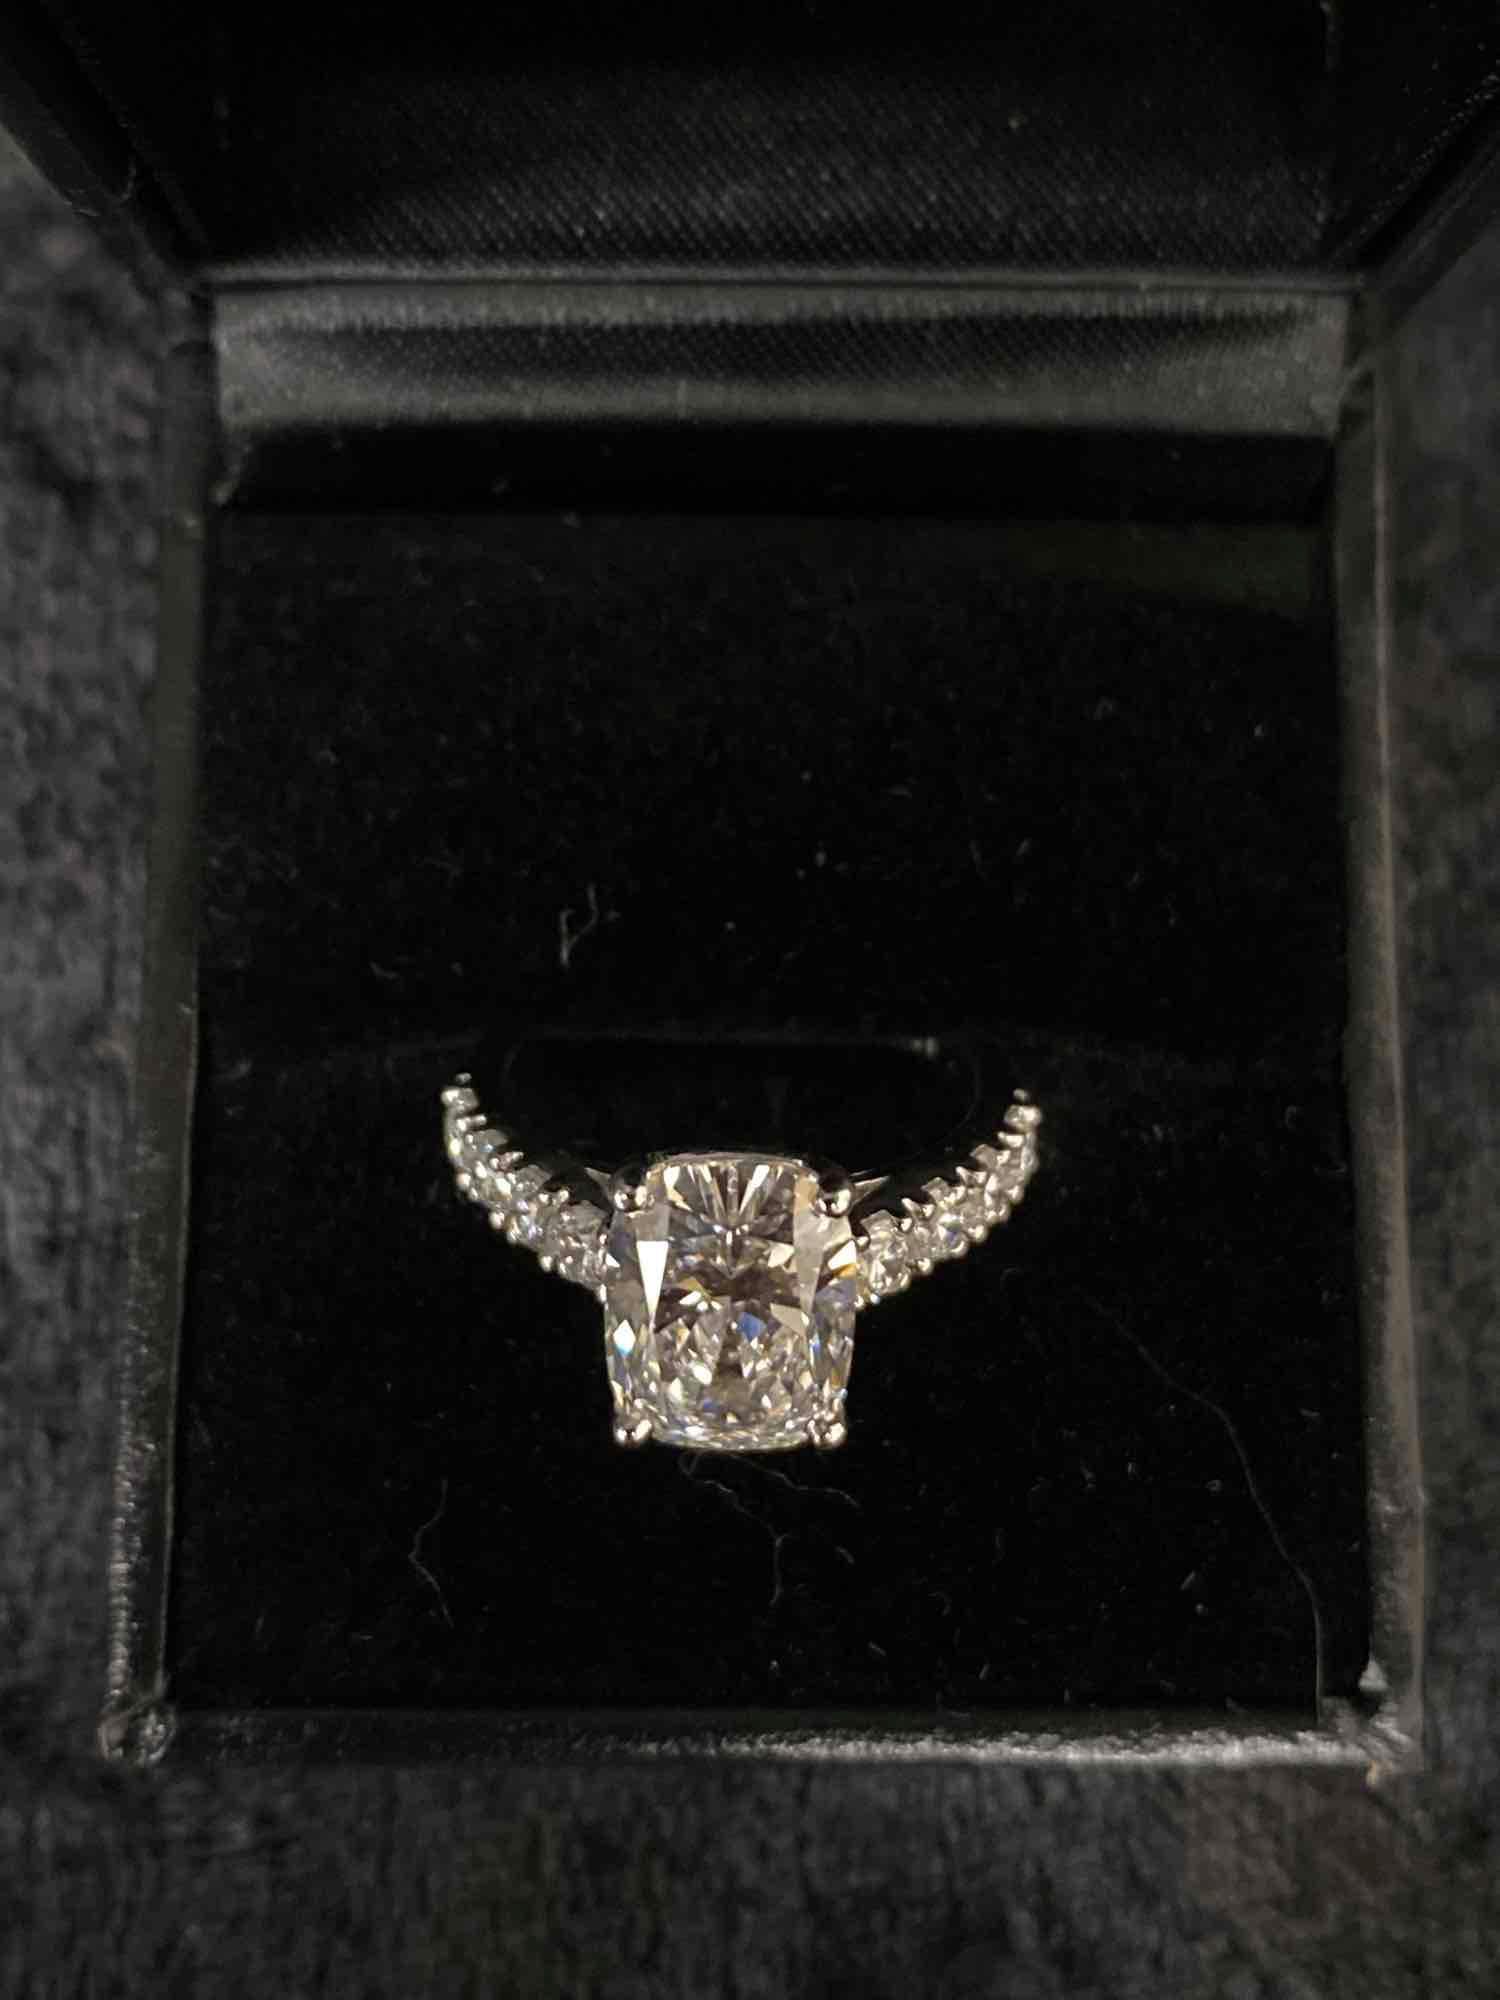 One Cushion CVD Diamond 3.05ct Set, 14k White Gold Complimented by 8 Round Diamonds (Lab Created)